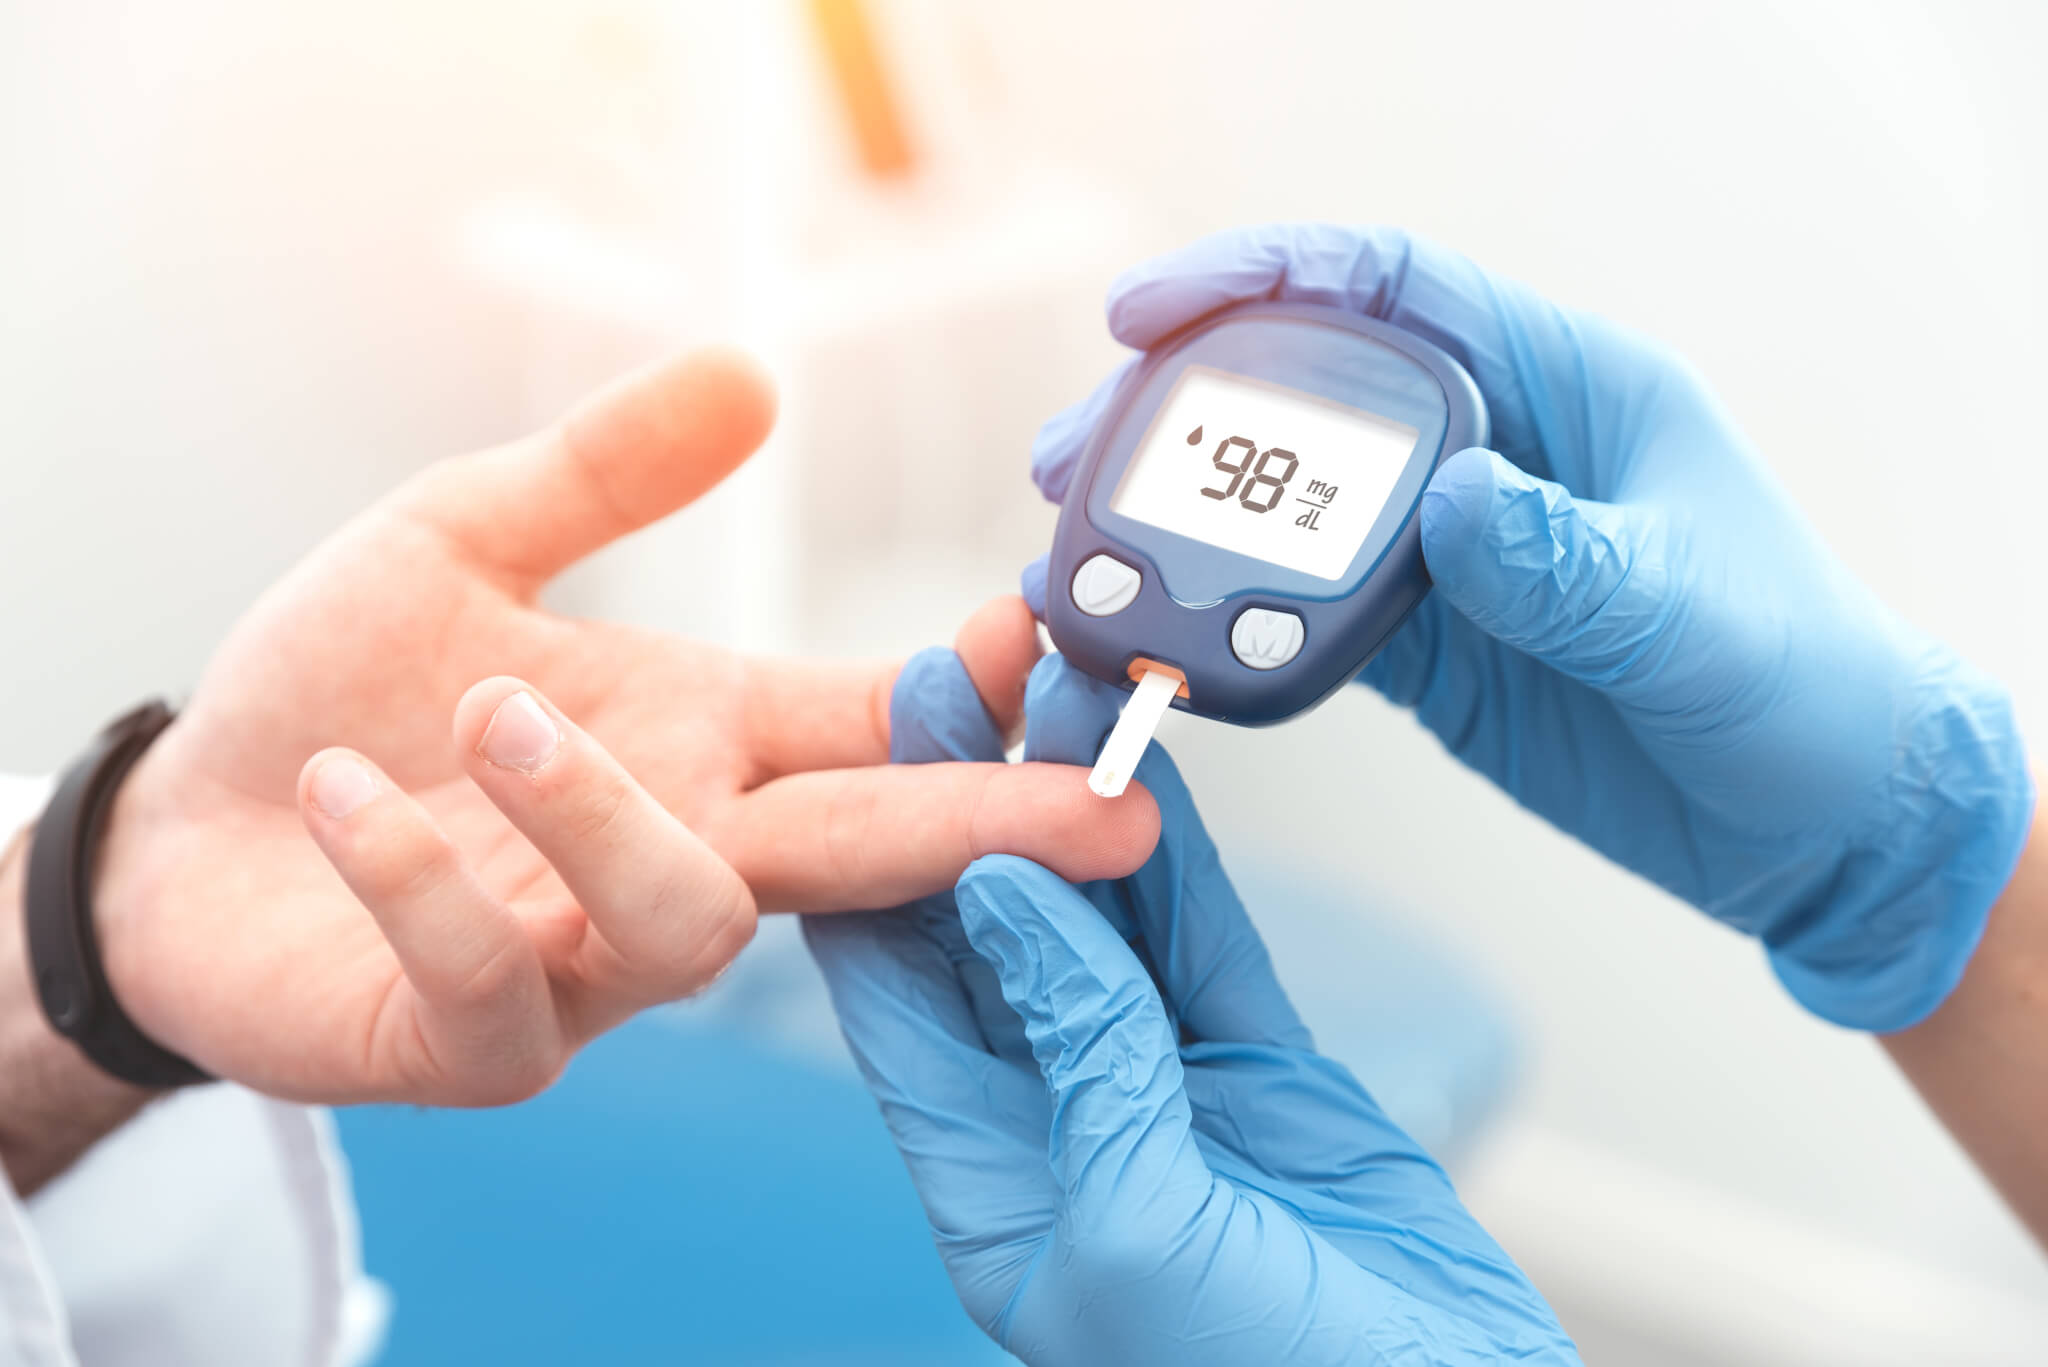 Doctor checking blood sugar level in diabetes patient